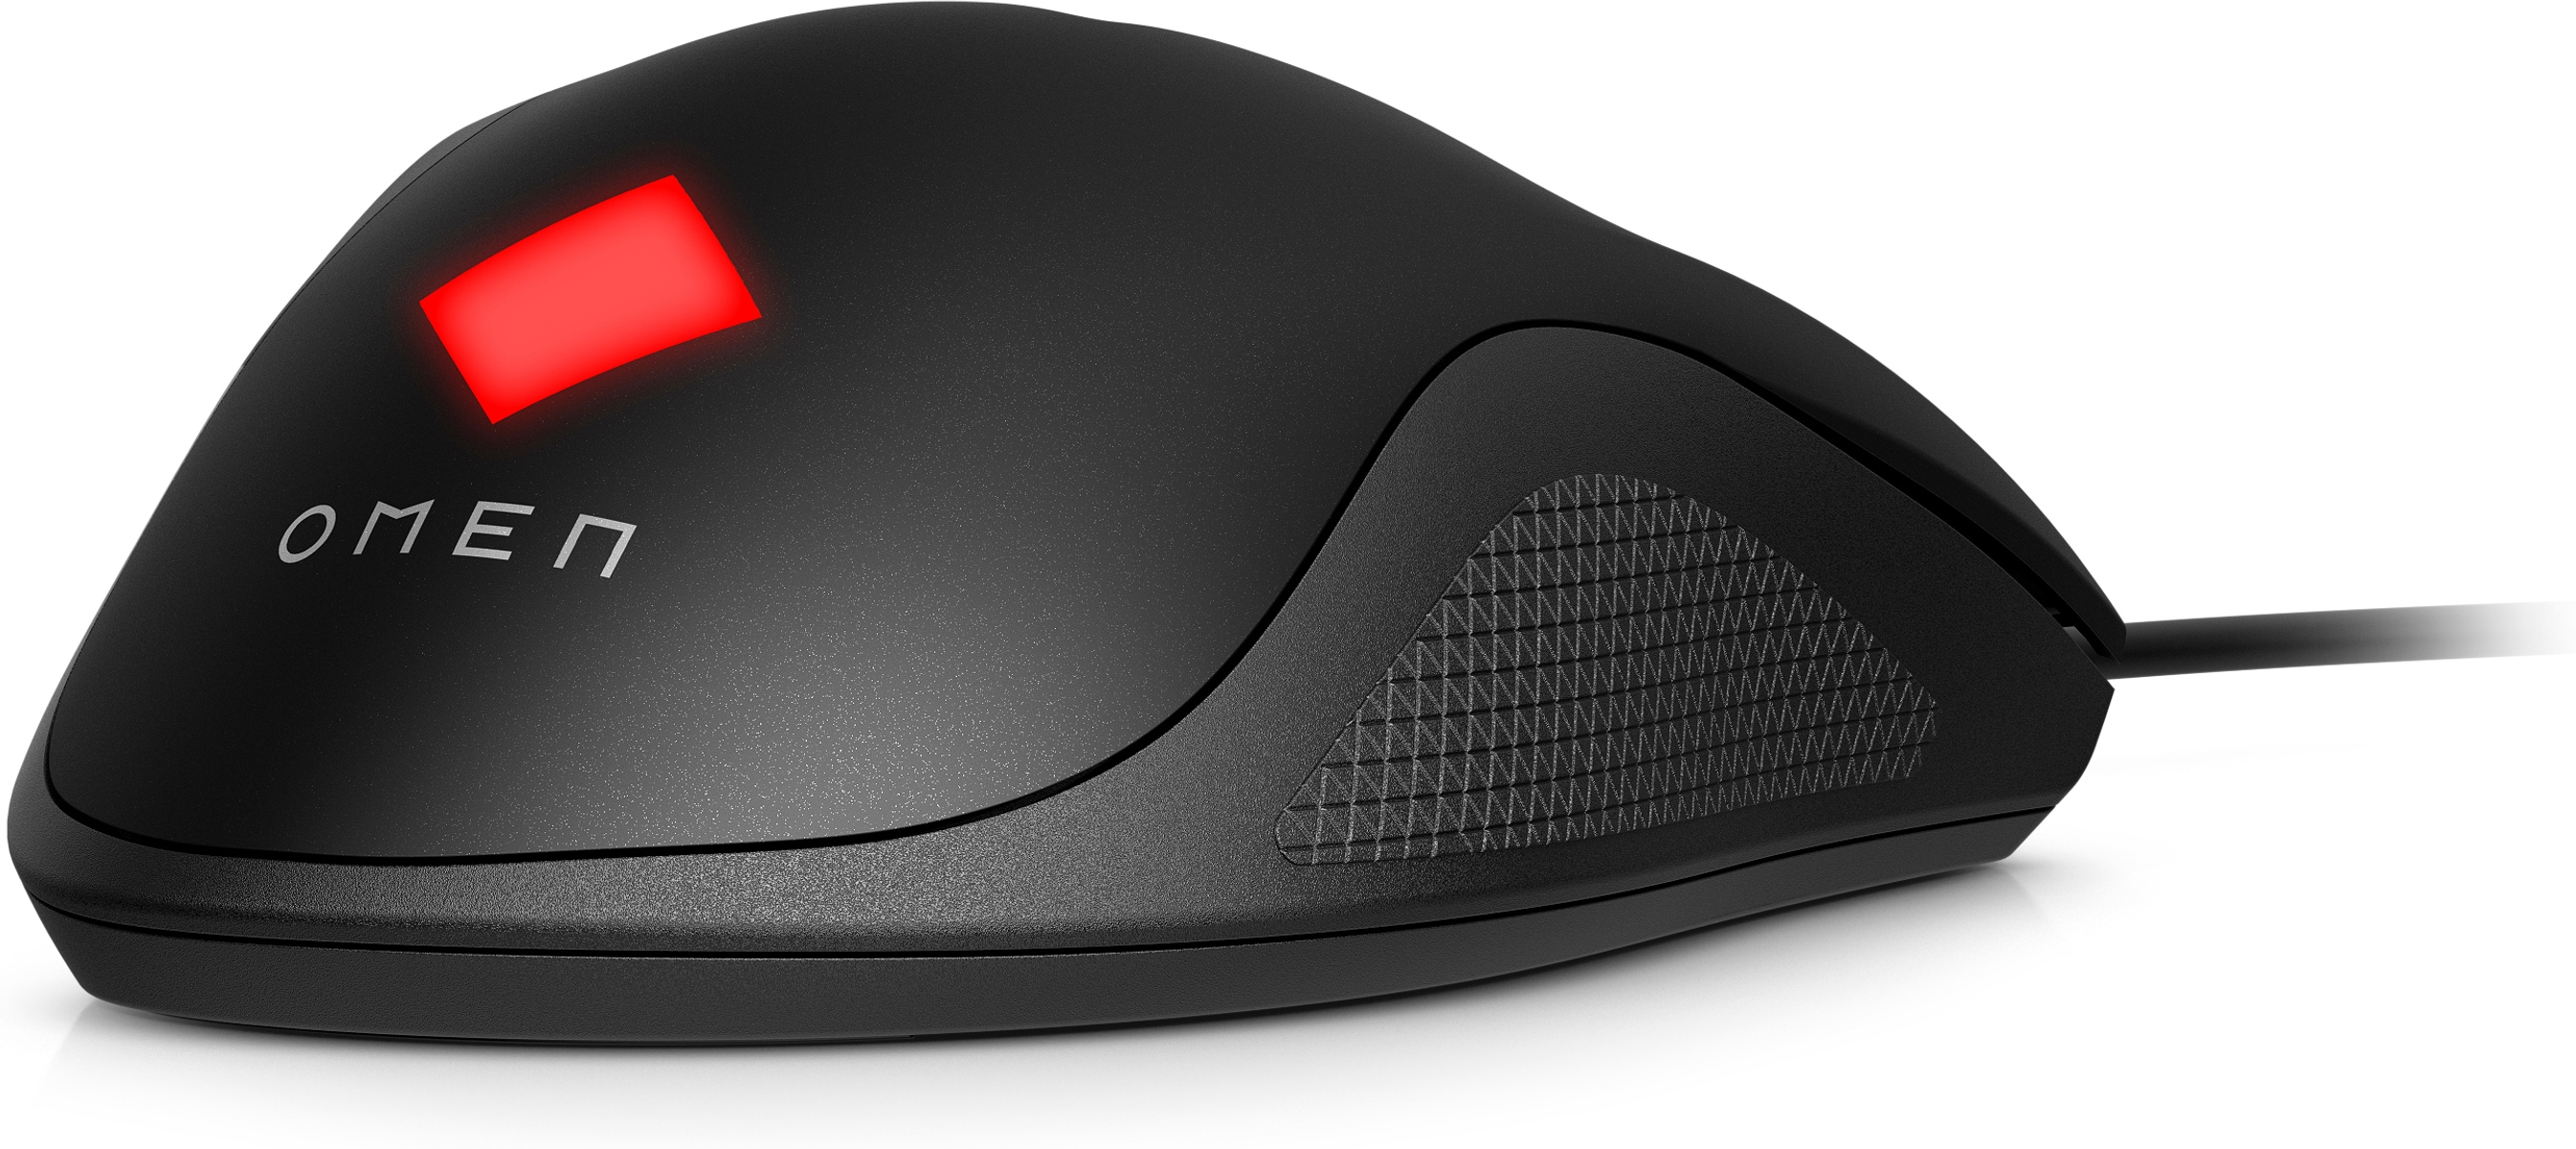 GAMING MOUSE OMEN ESSENTIAL VECTOR HP Schwarz 8BC52AA Gaming-Maus,